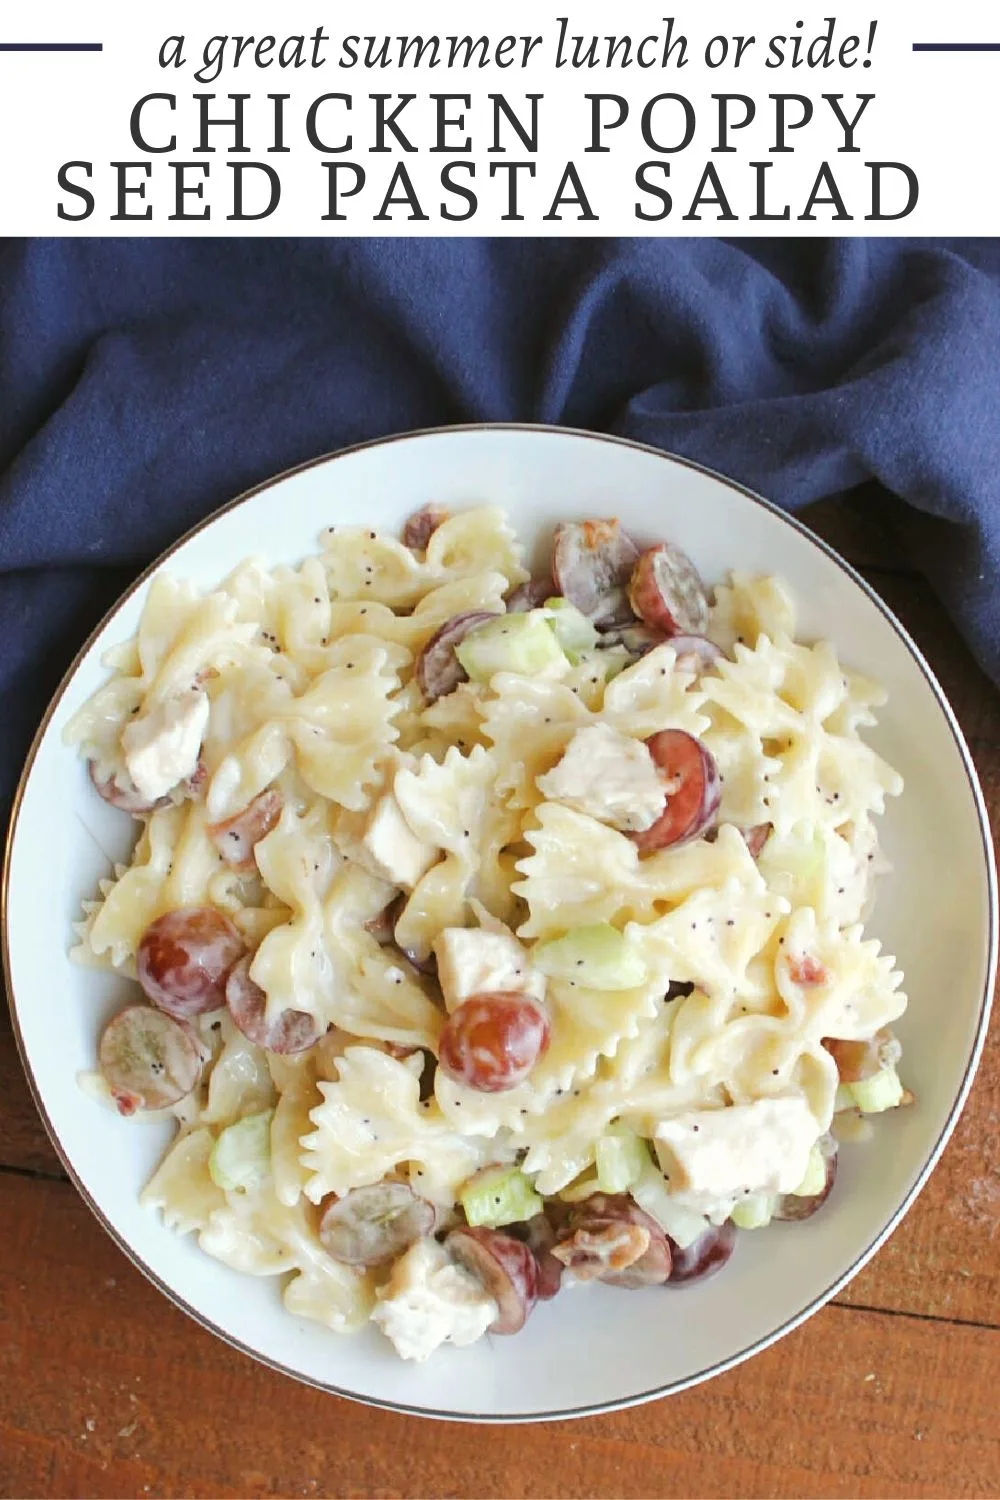 Chicken poppy seed pasta salad features the sweetness of grapes and a creamy poppy seed dressing. It is a perfect summer lunch.